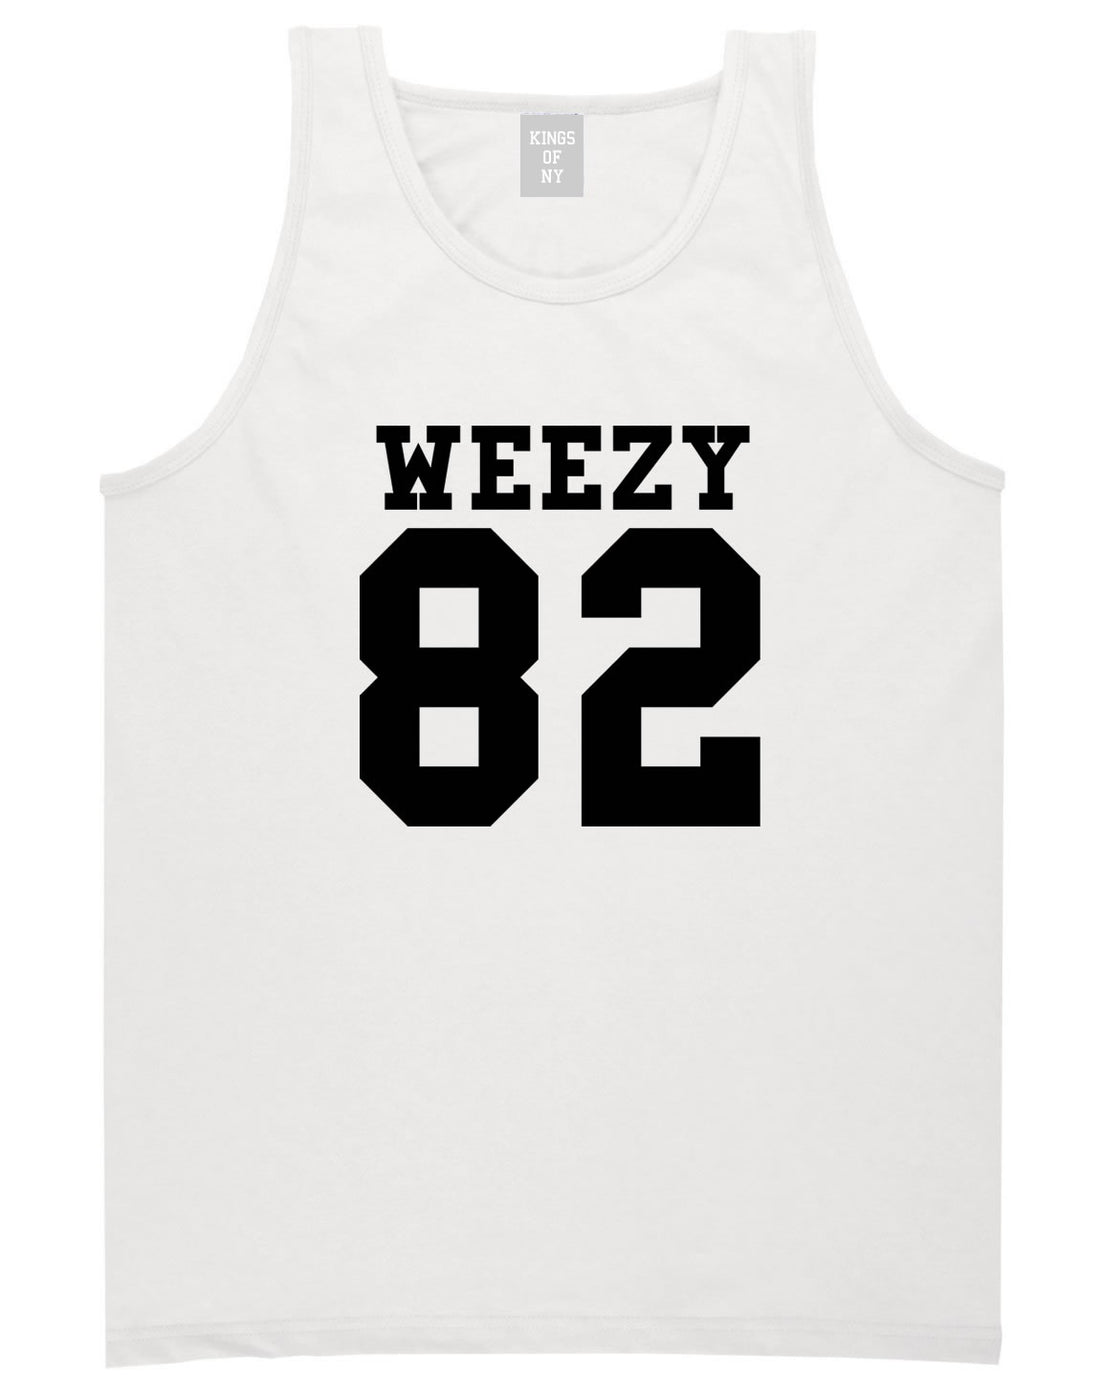 Weezy 82 Team Tank Top in White by Kings Of NY